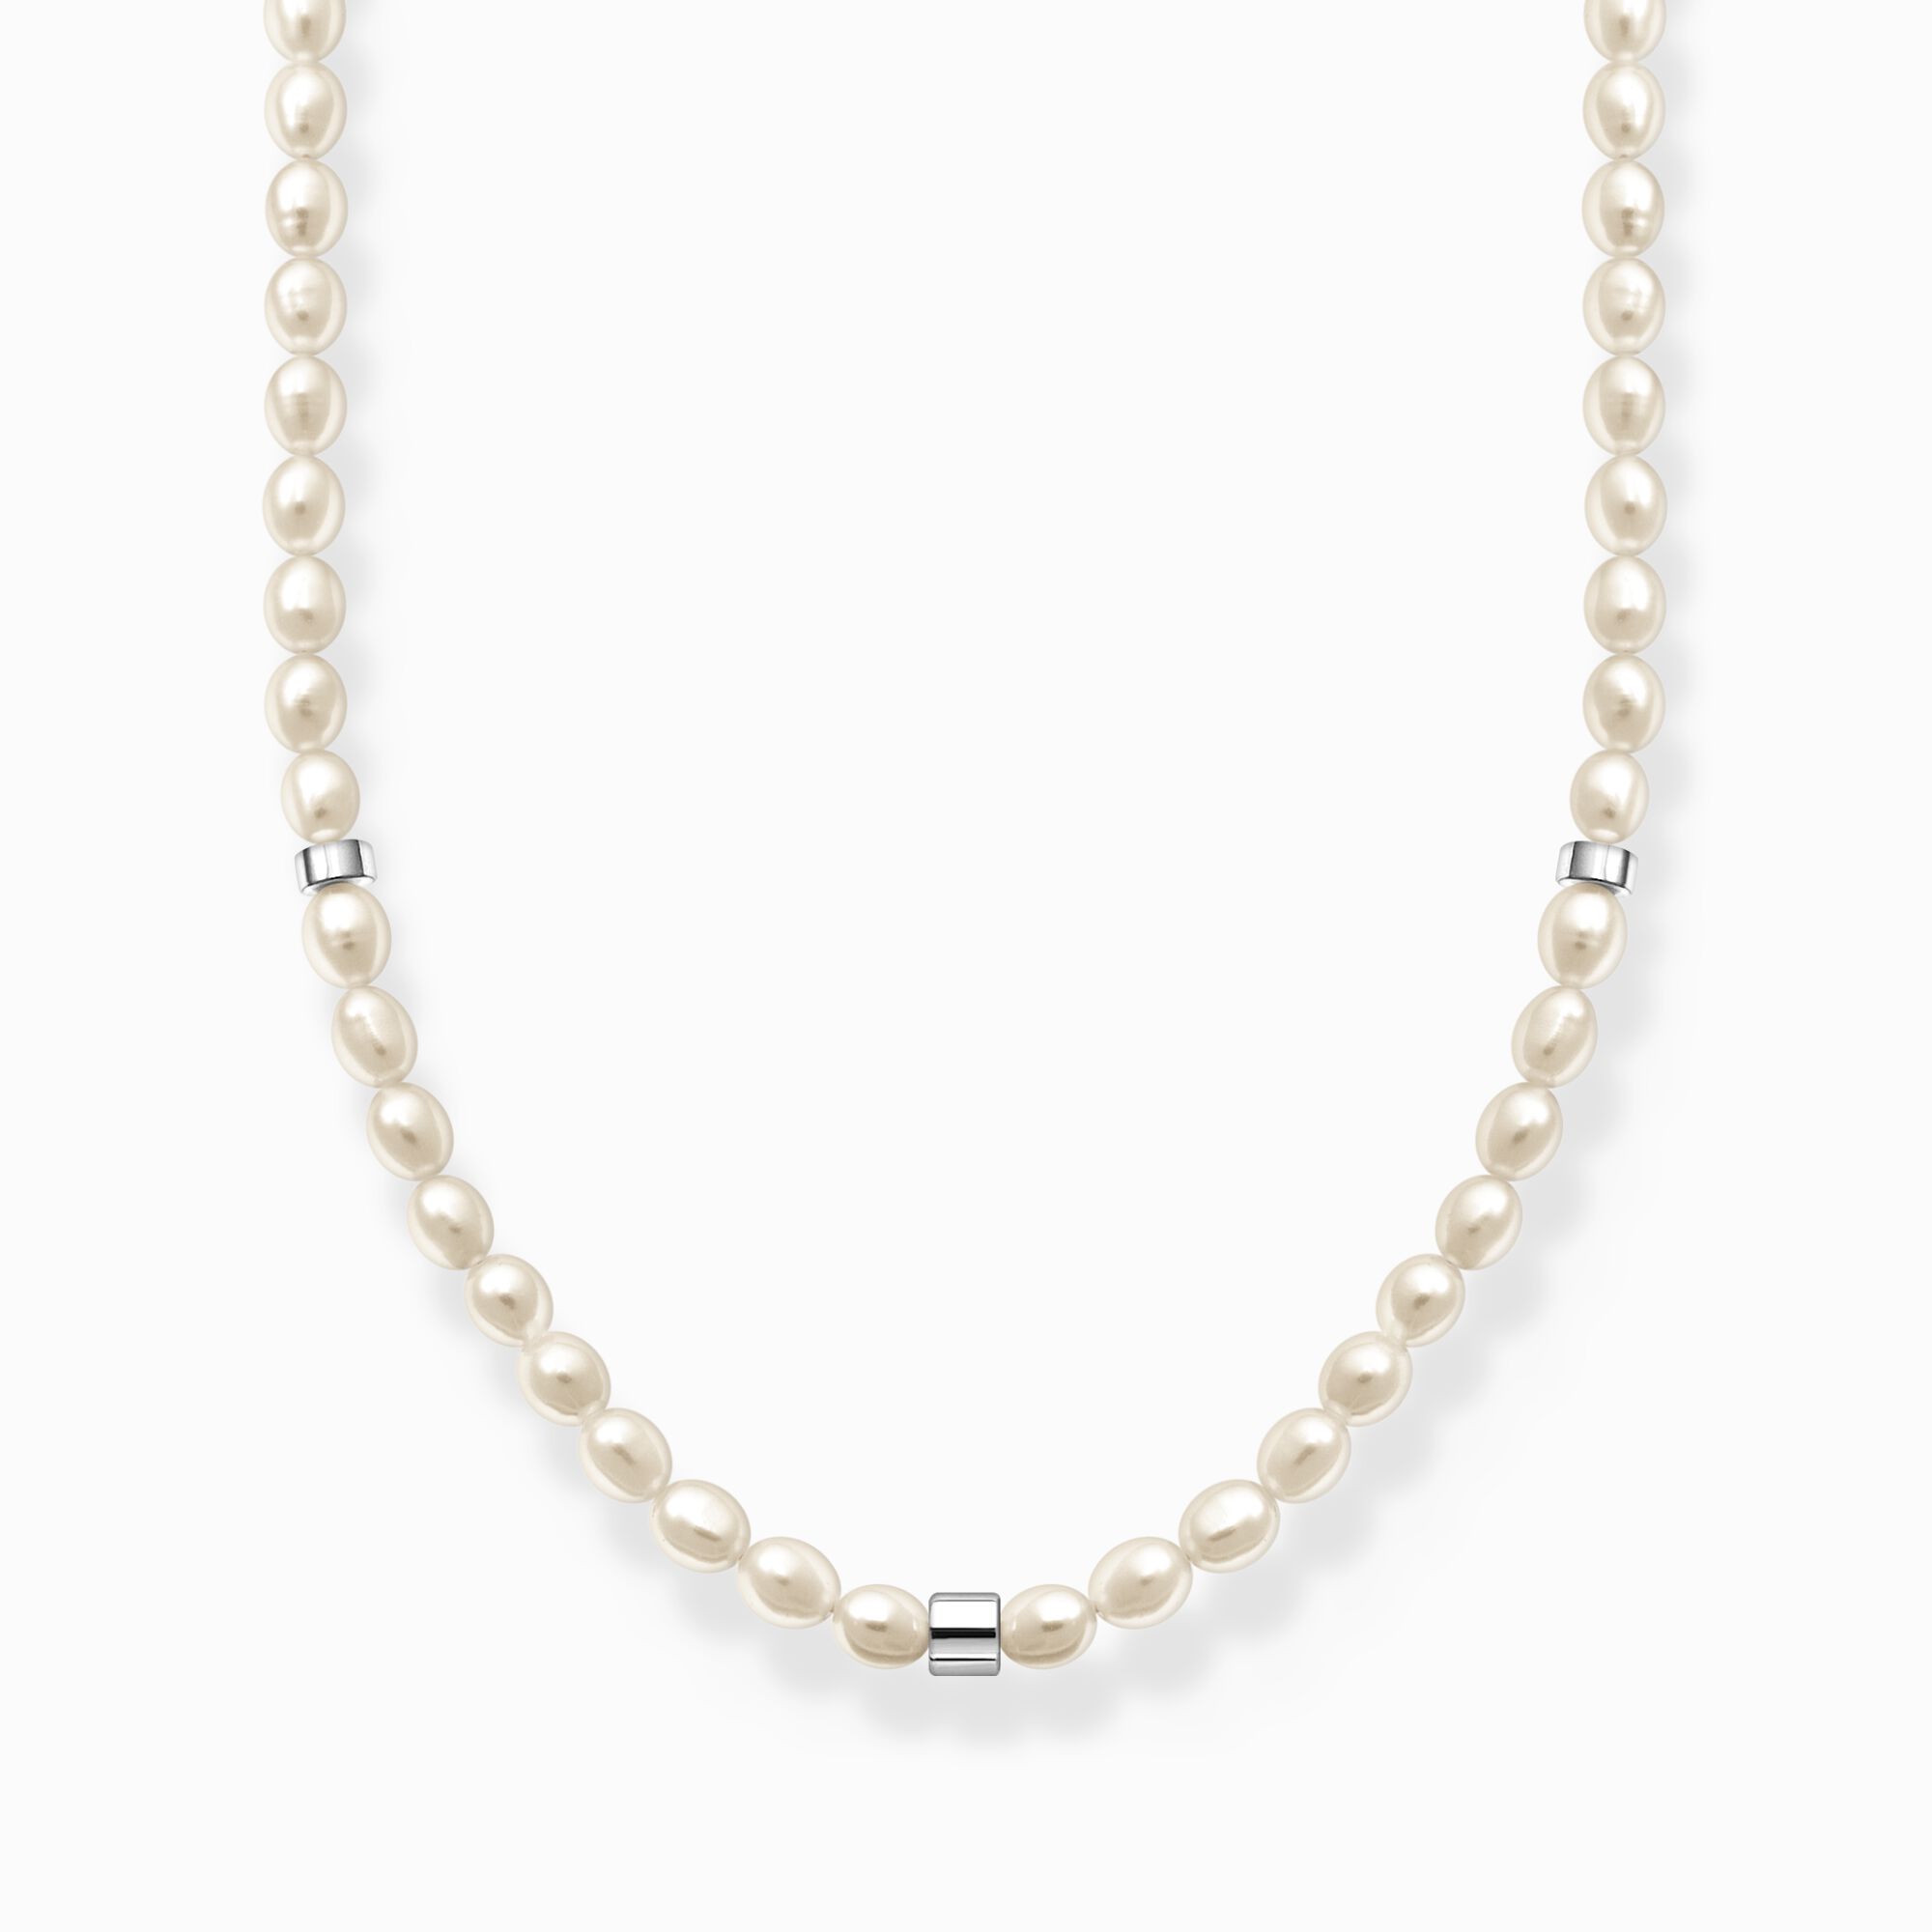 Necklace with pearls from the Charming Collection collection in the THOMAS SABO online store